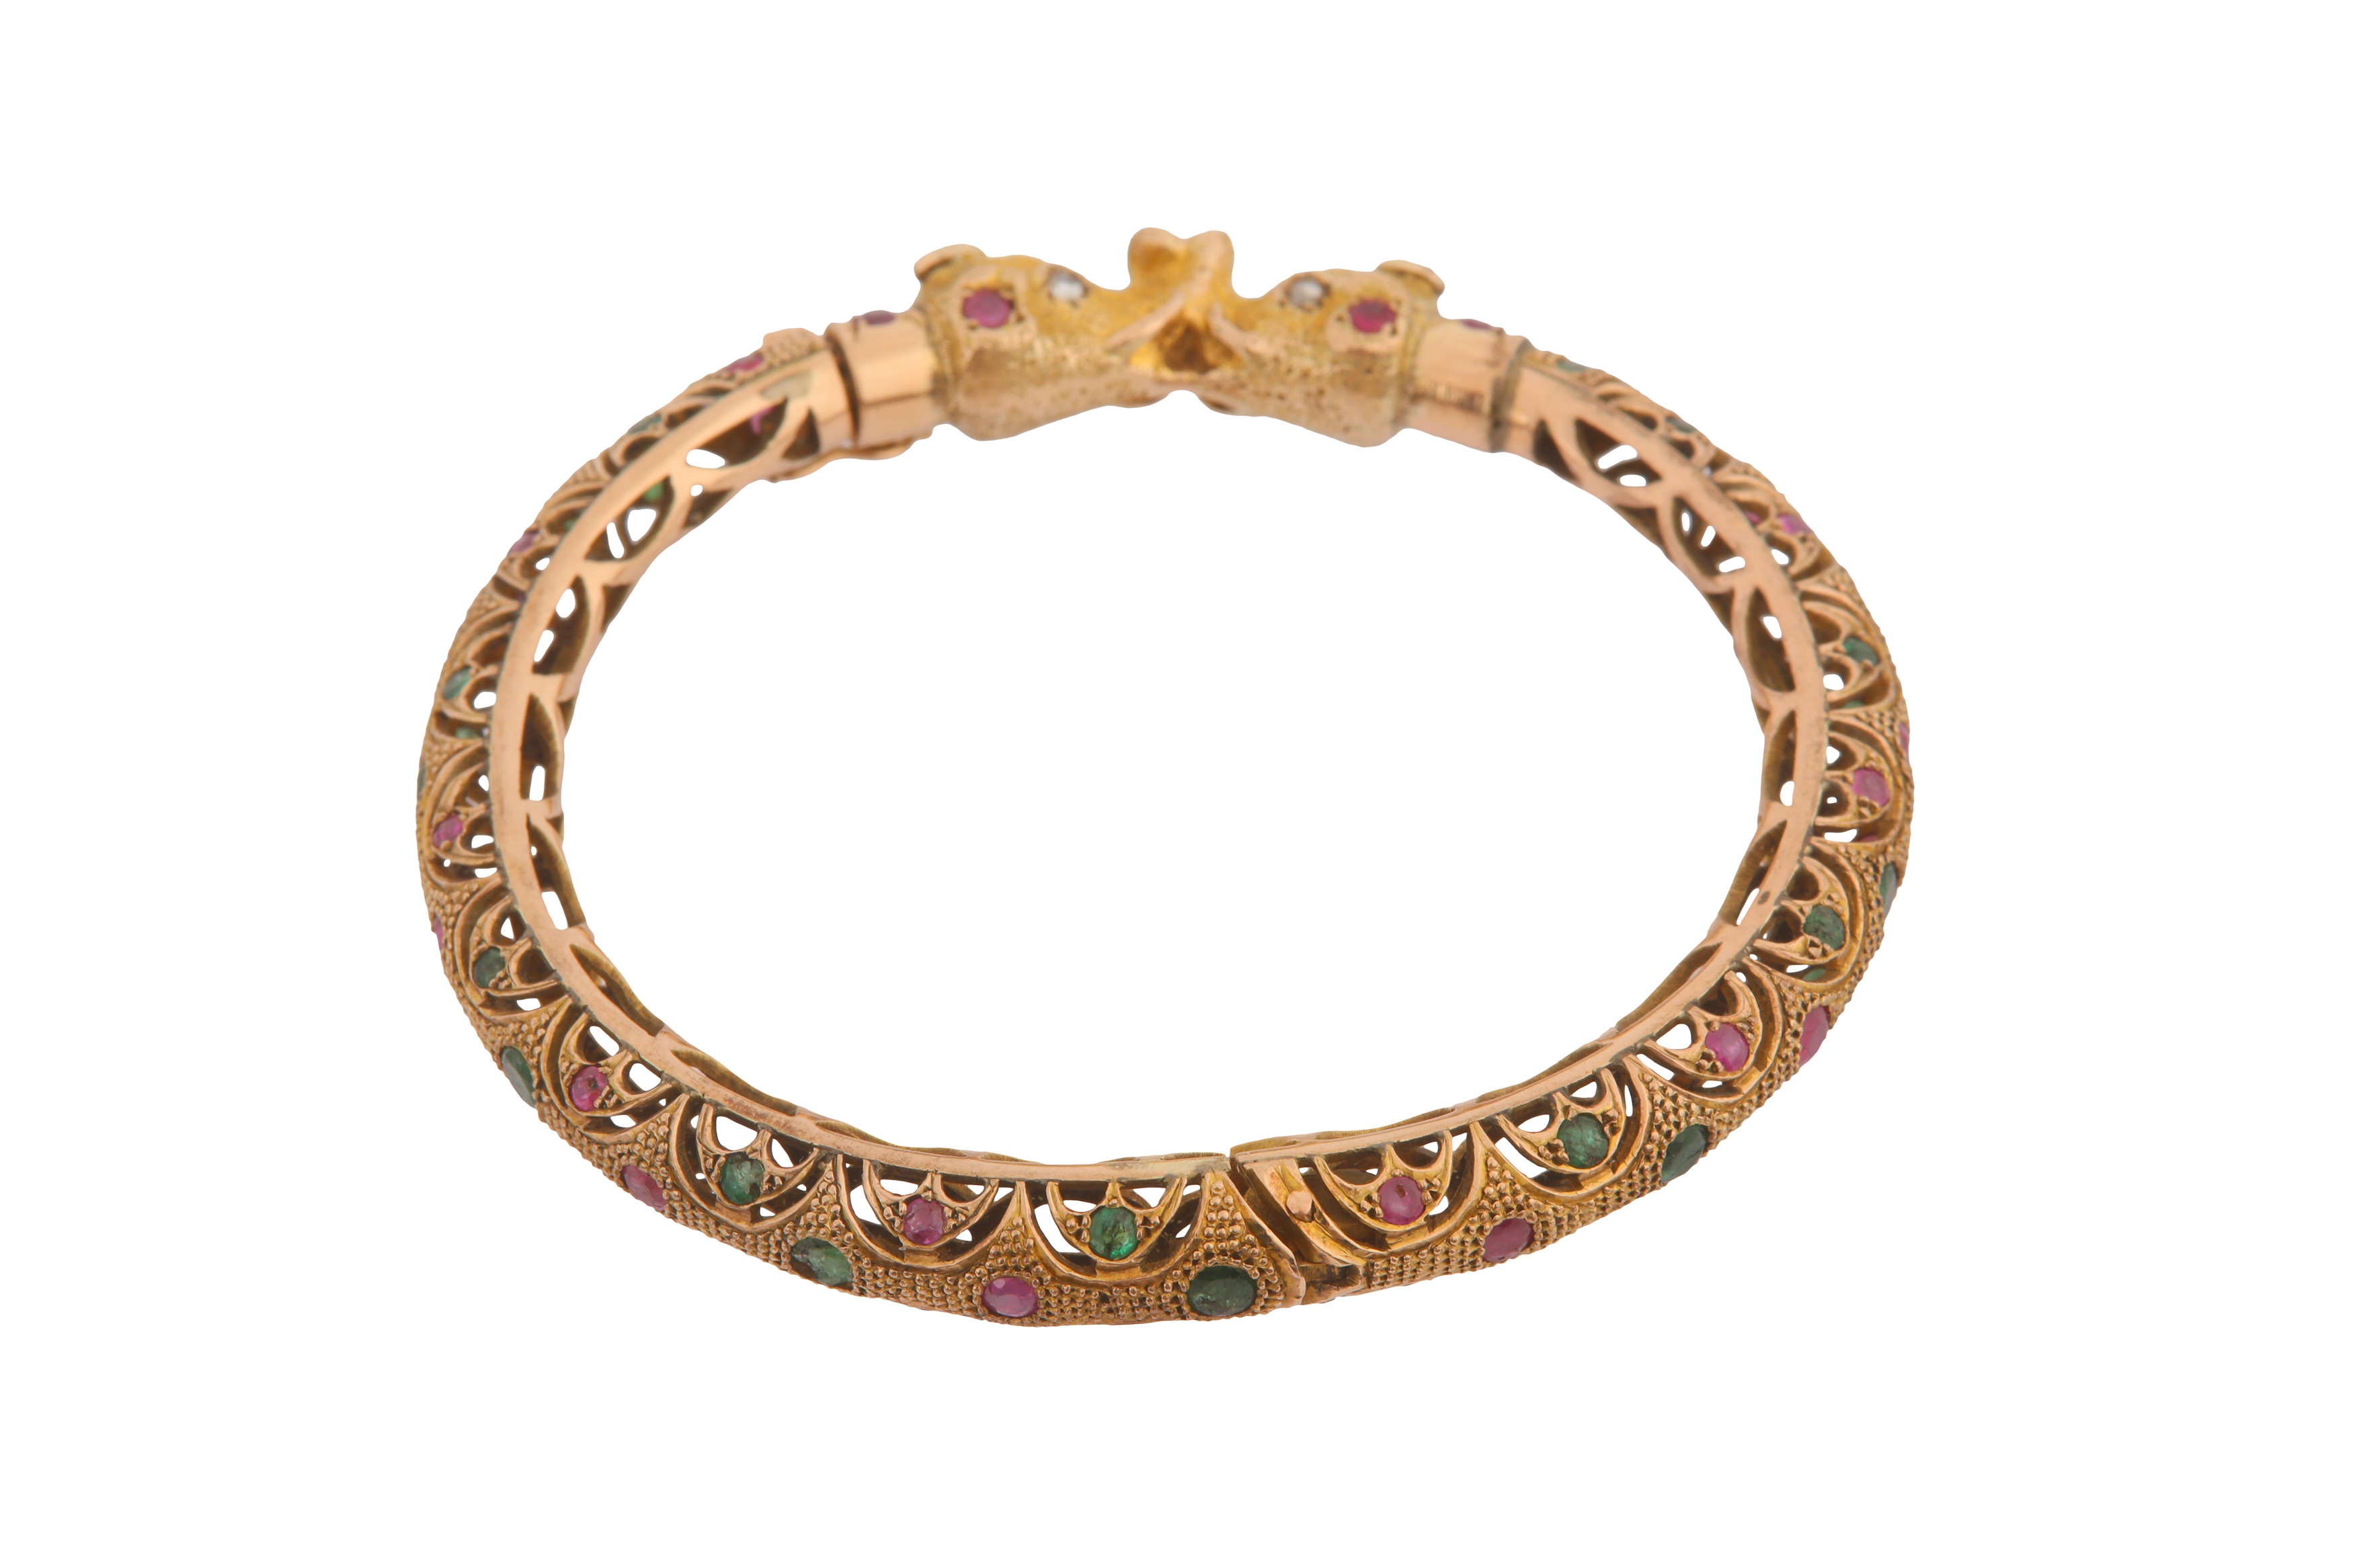 A RUBY AND EMERALD BANGLE - Image 2 of 2